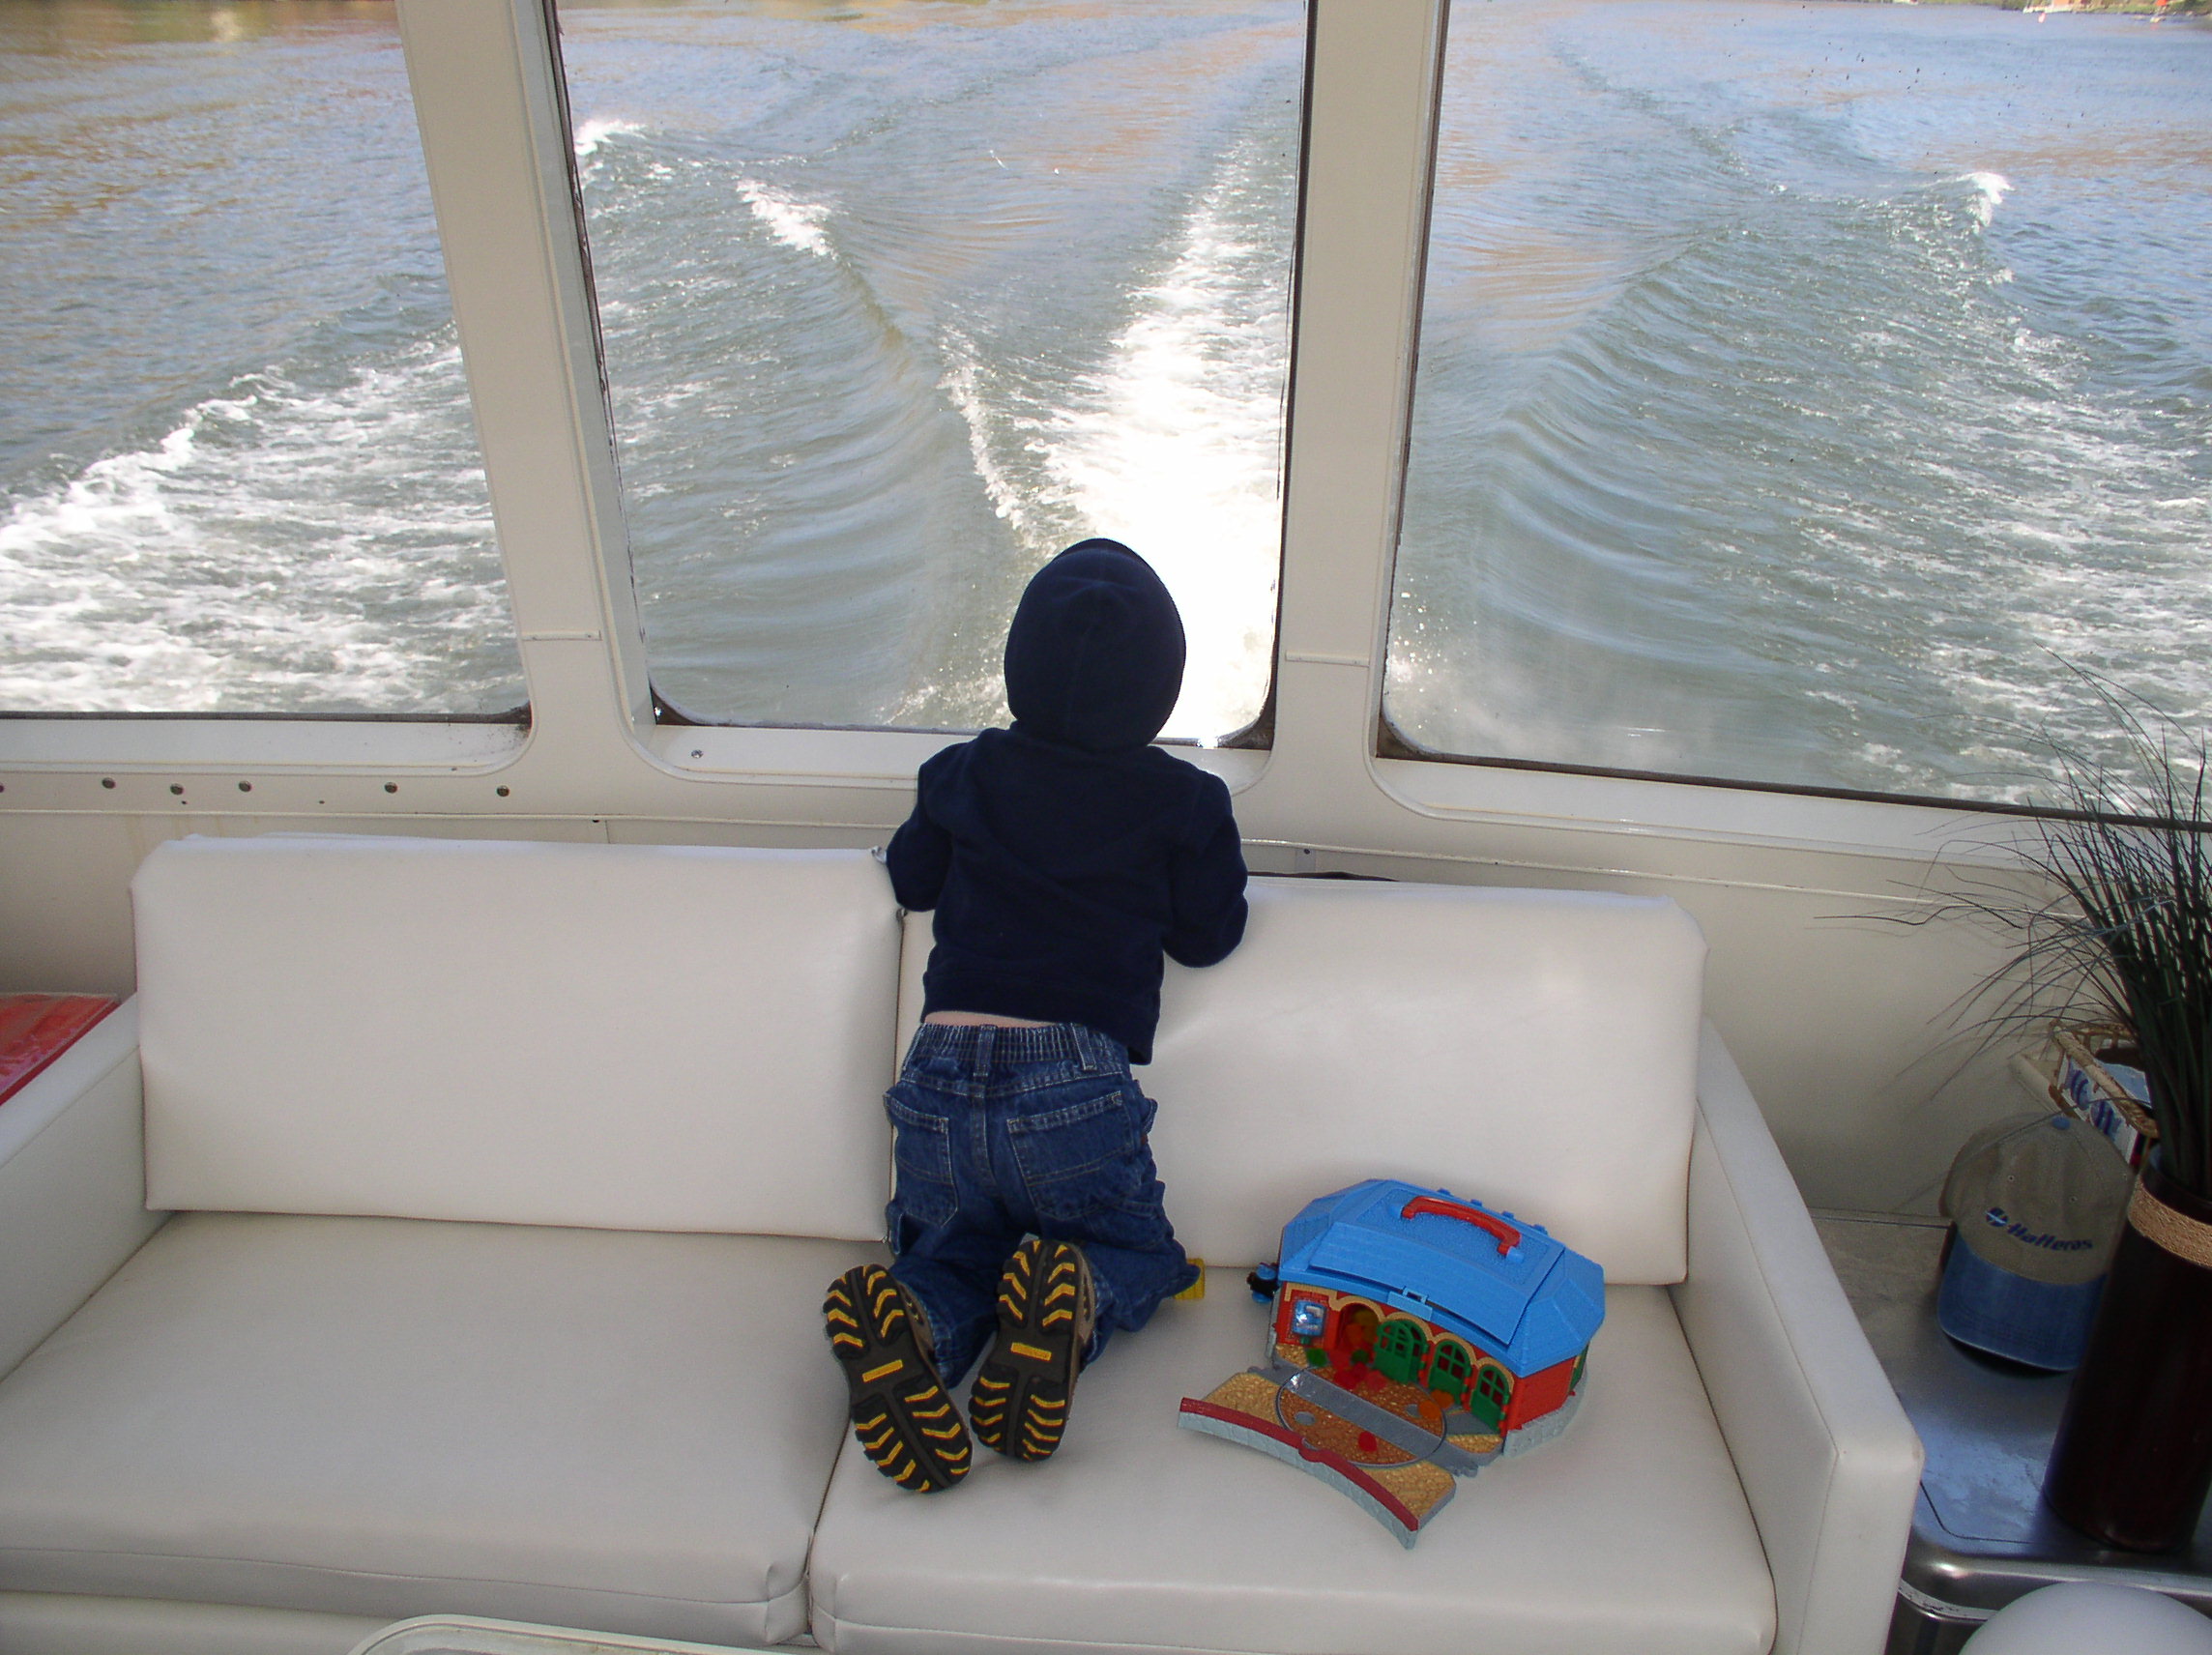 Looking out of "Daddy's big boat"